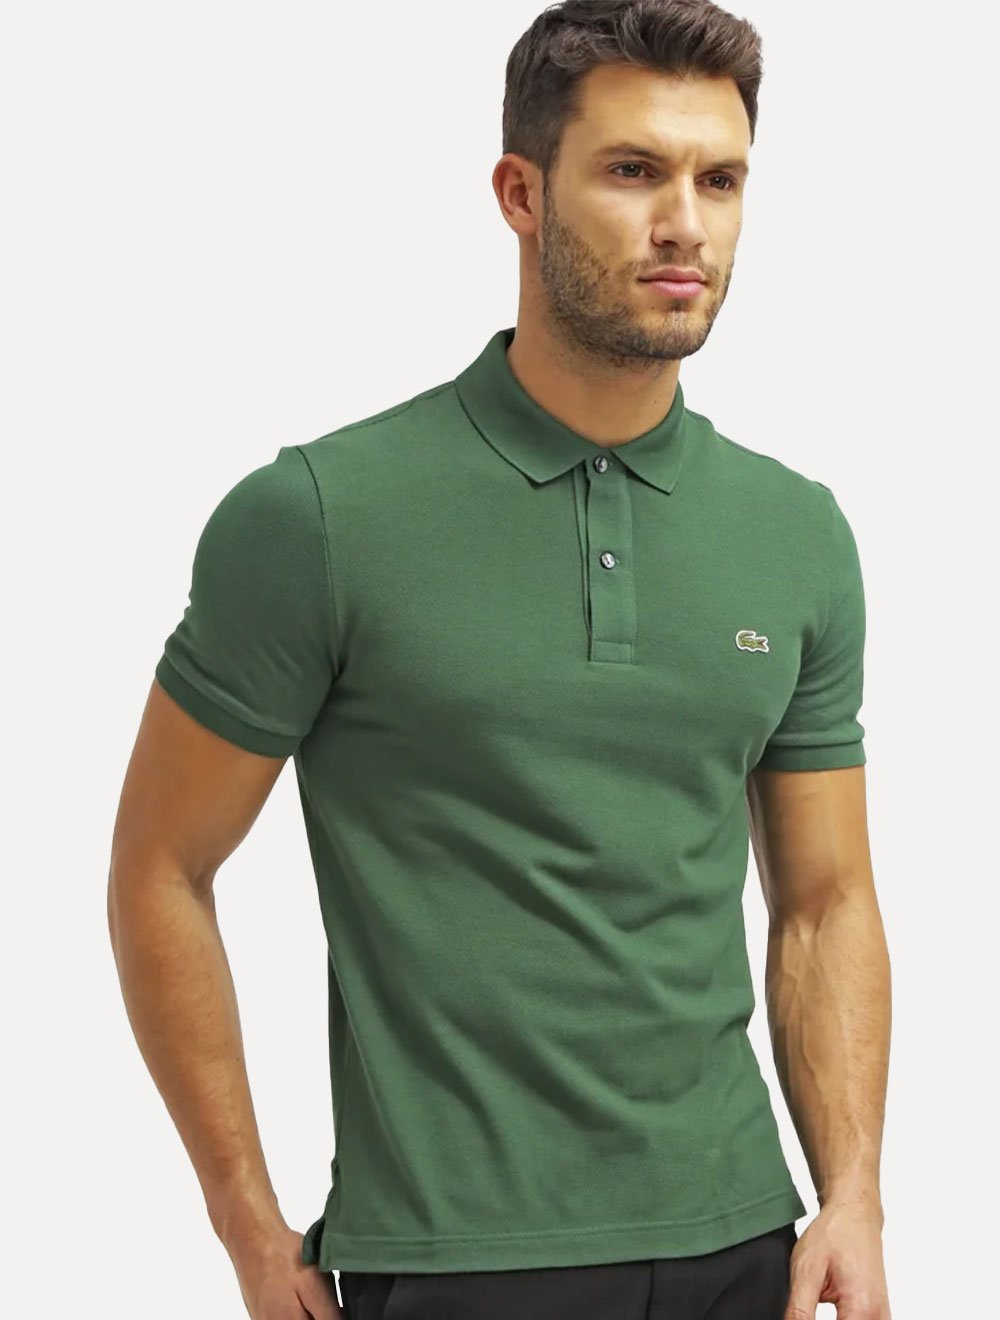 Hollister cropped rugby top in green